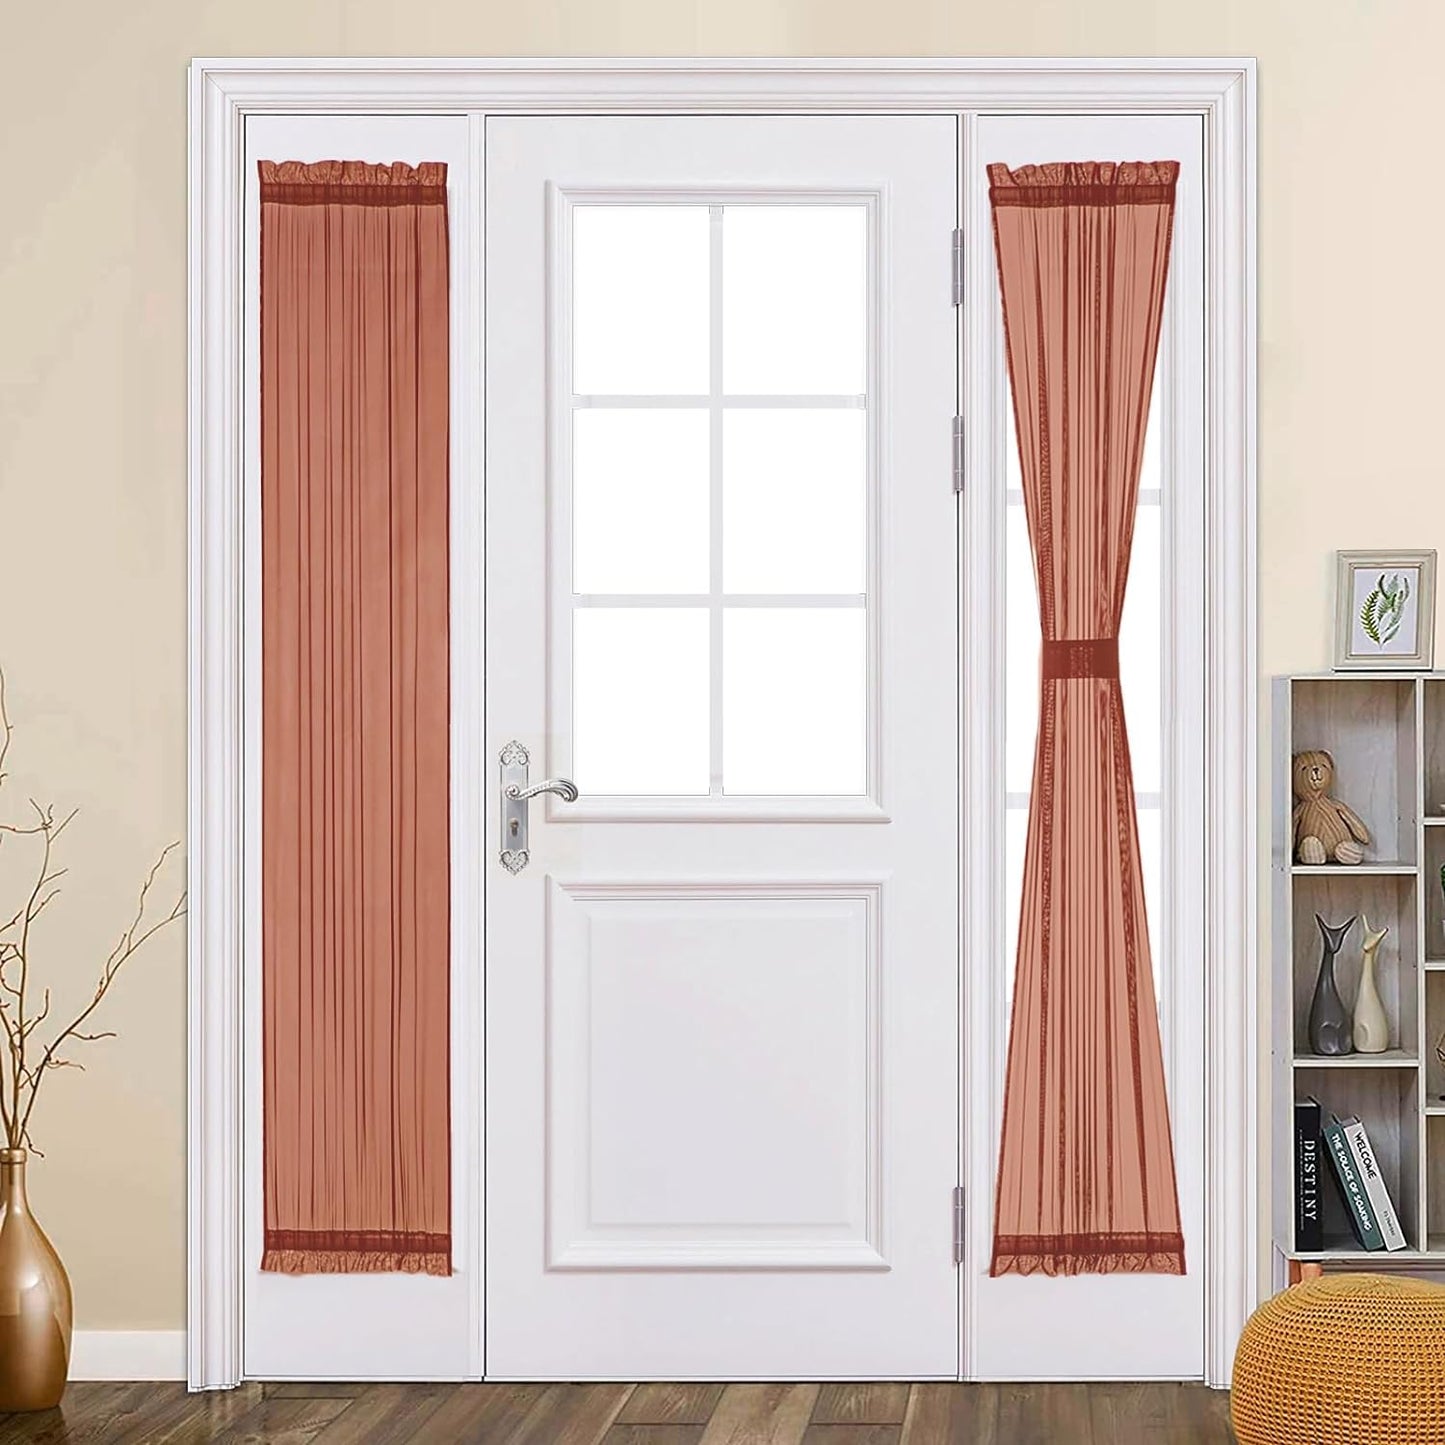 MIULEE French Door Sheer Curtains for Front Back Patio Glass Door Light Filtering Window Treatment with 2 Tiebacks 54 Wide and 72 Inches Length, White, Set of 2  MIULEE Burnt Orange 25"W X 72"L 